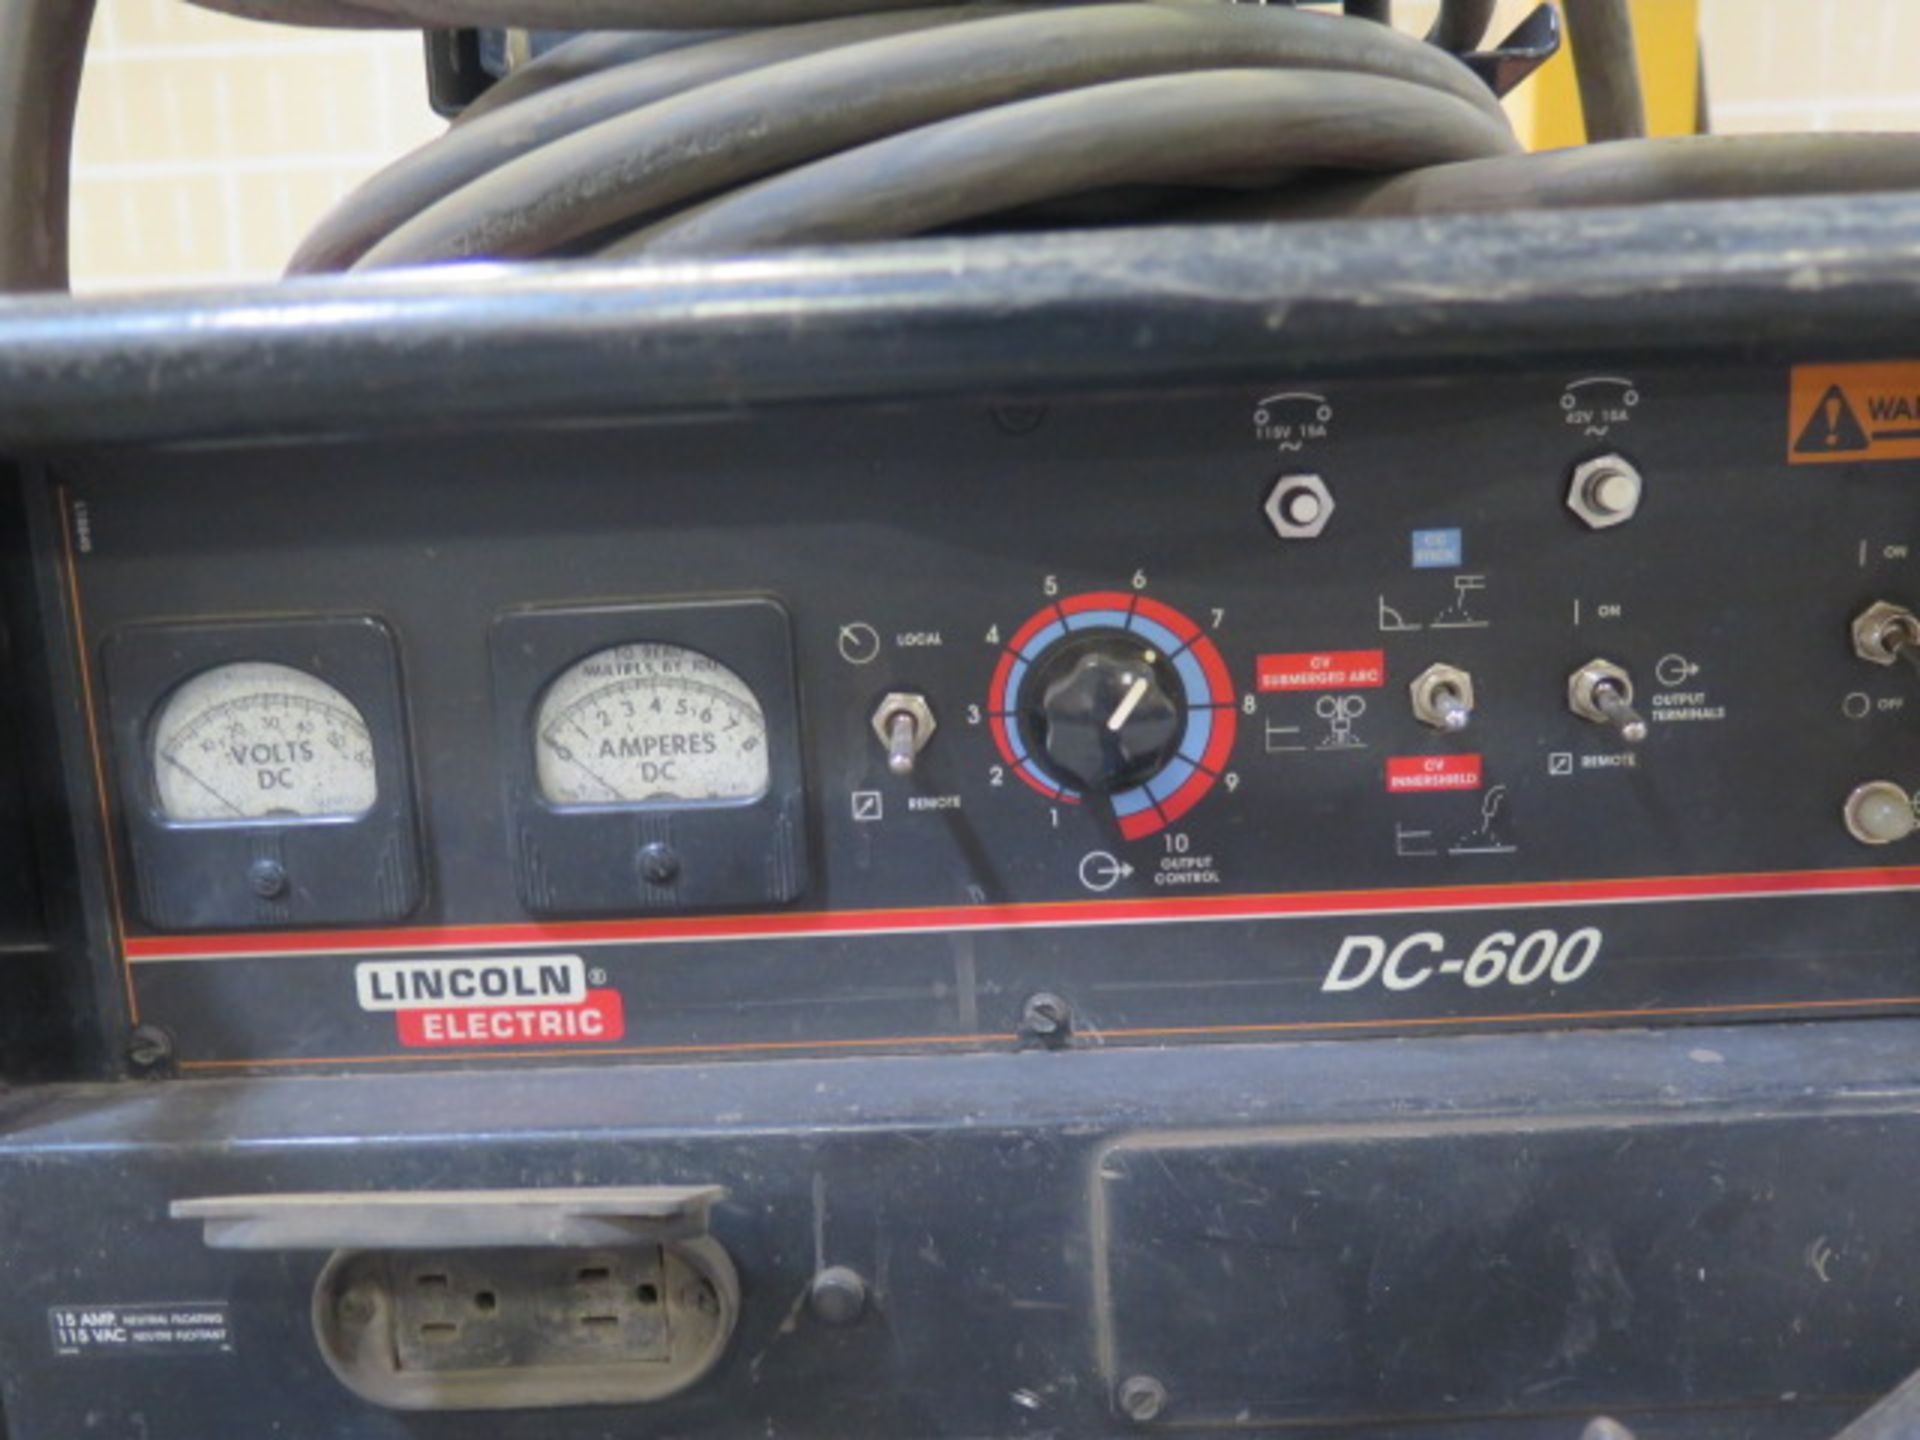 Lincoln DC-600 Arc Welding s/n U1041206274 w/ Multi-Process Switch, Lincoln LN-10, SOLD AS IS - Image 9 of 9